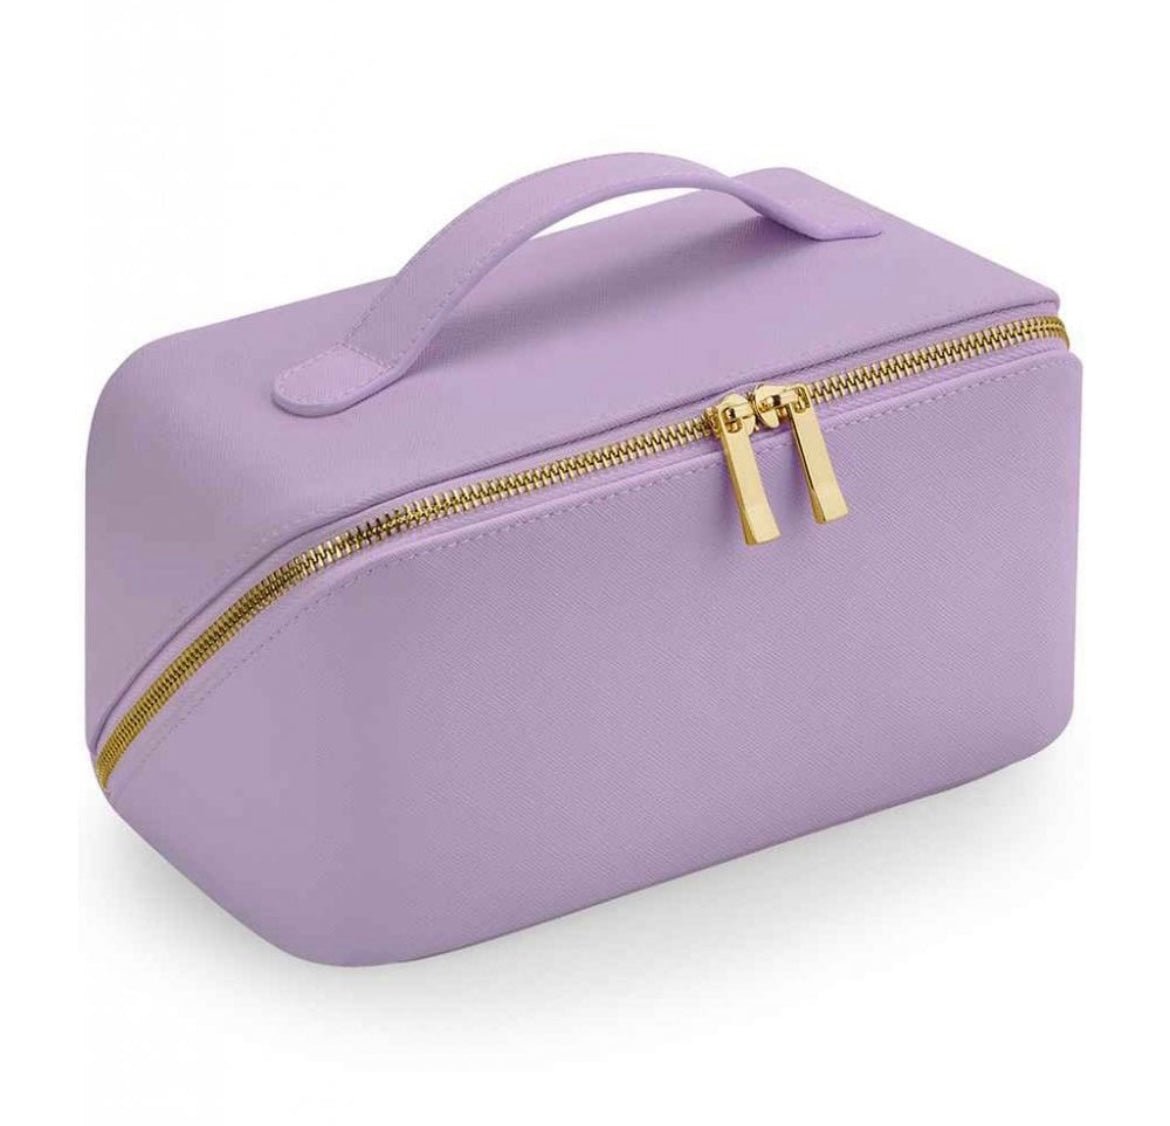 Open Flat Accessory Case - Large - sweetassistant